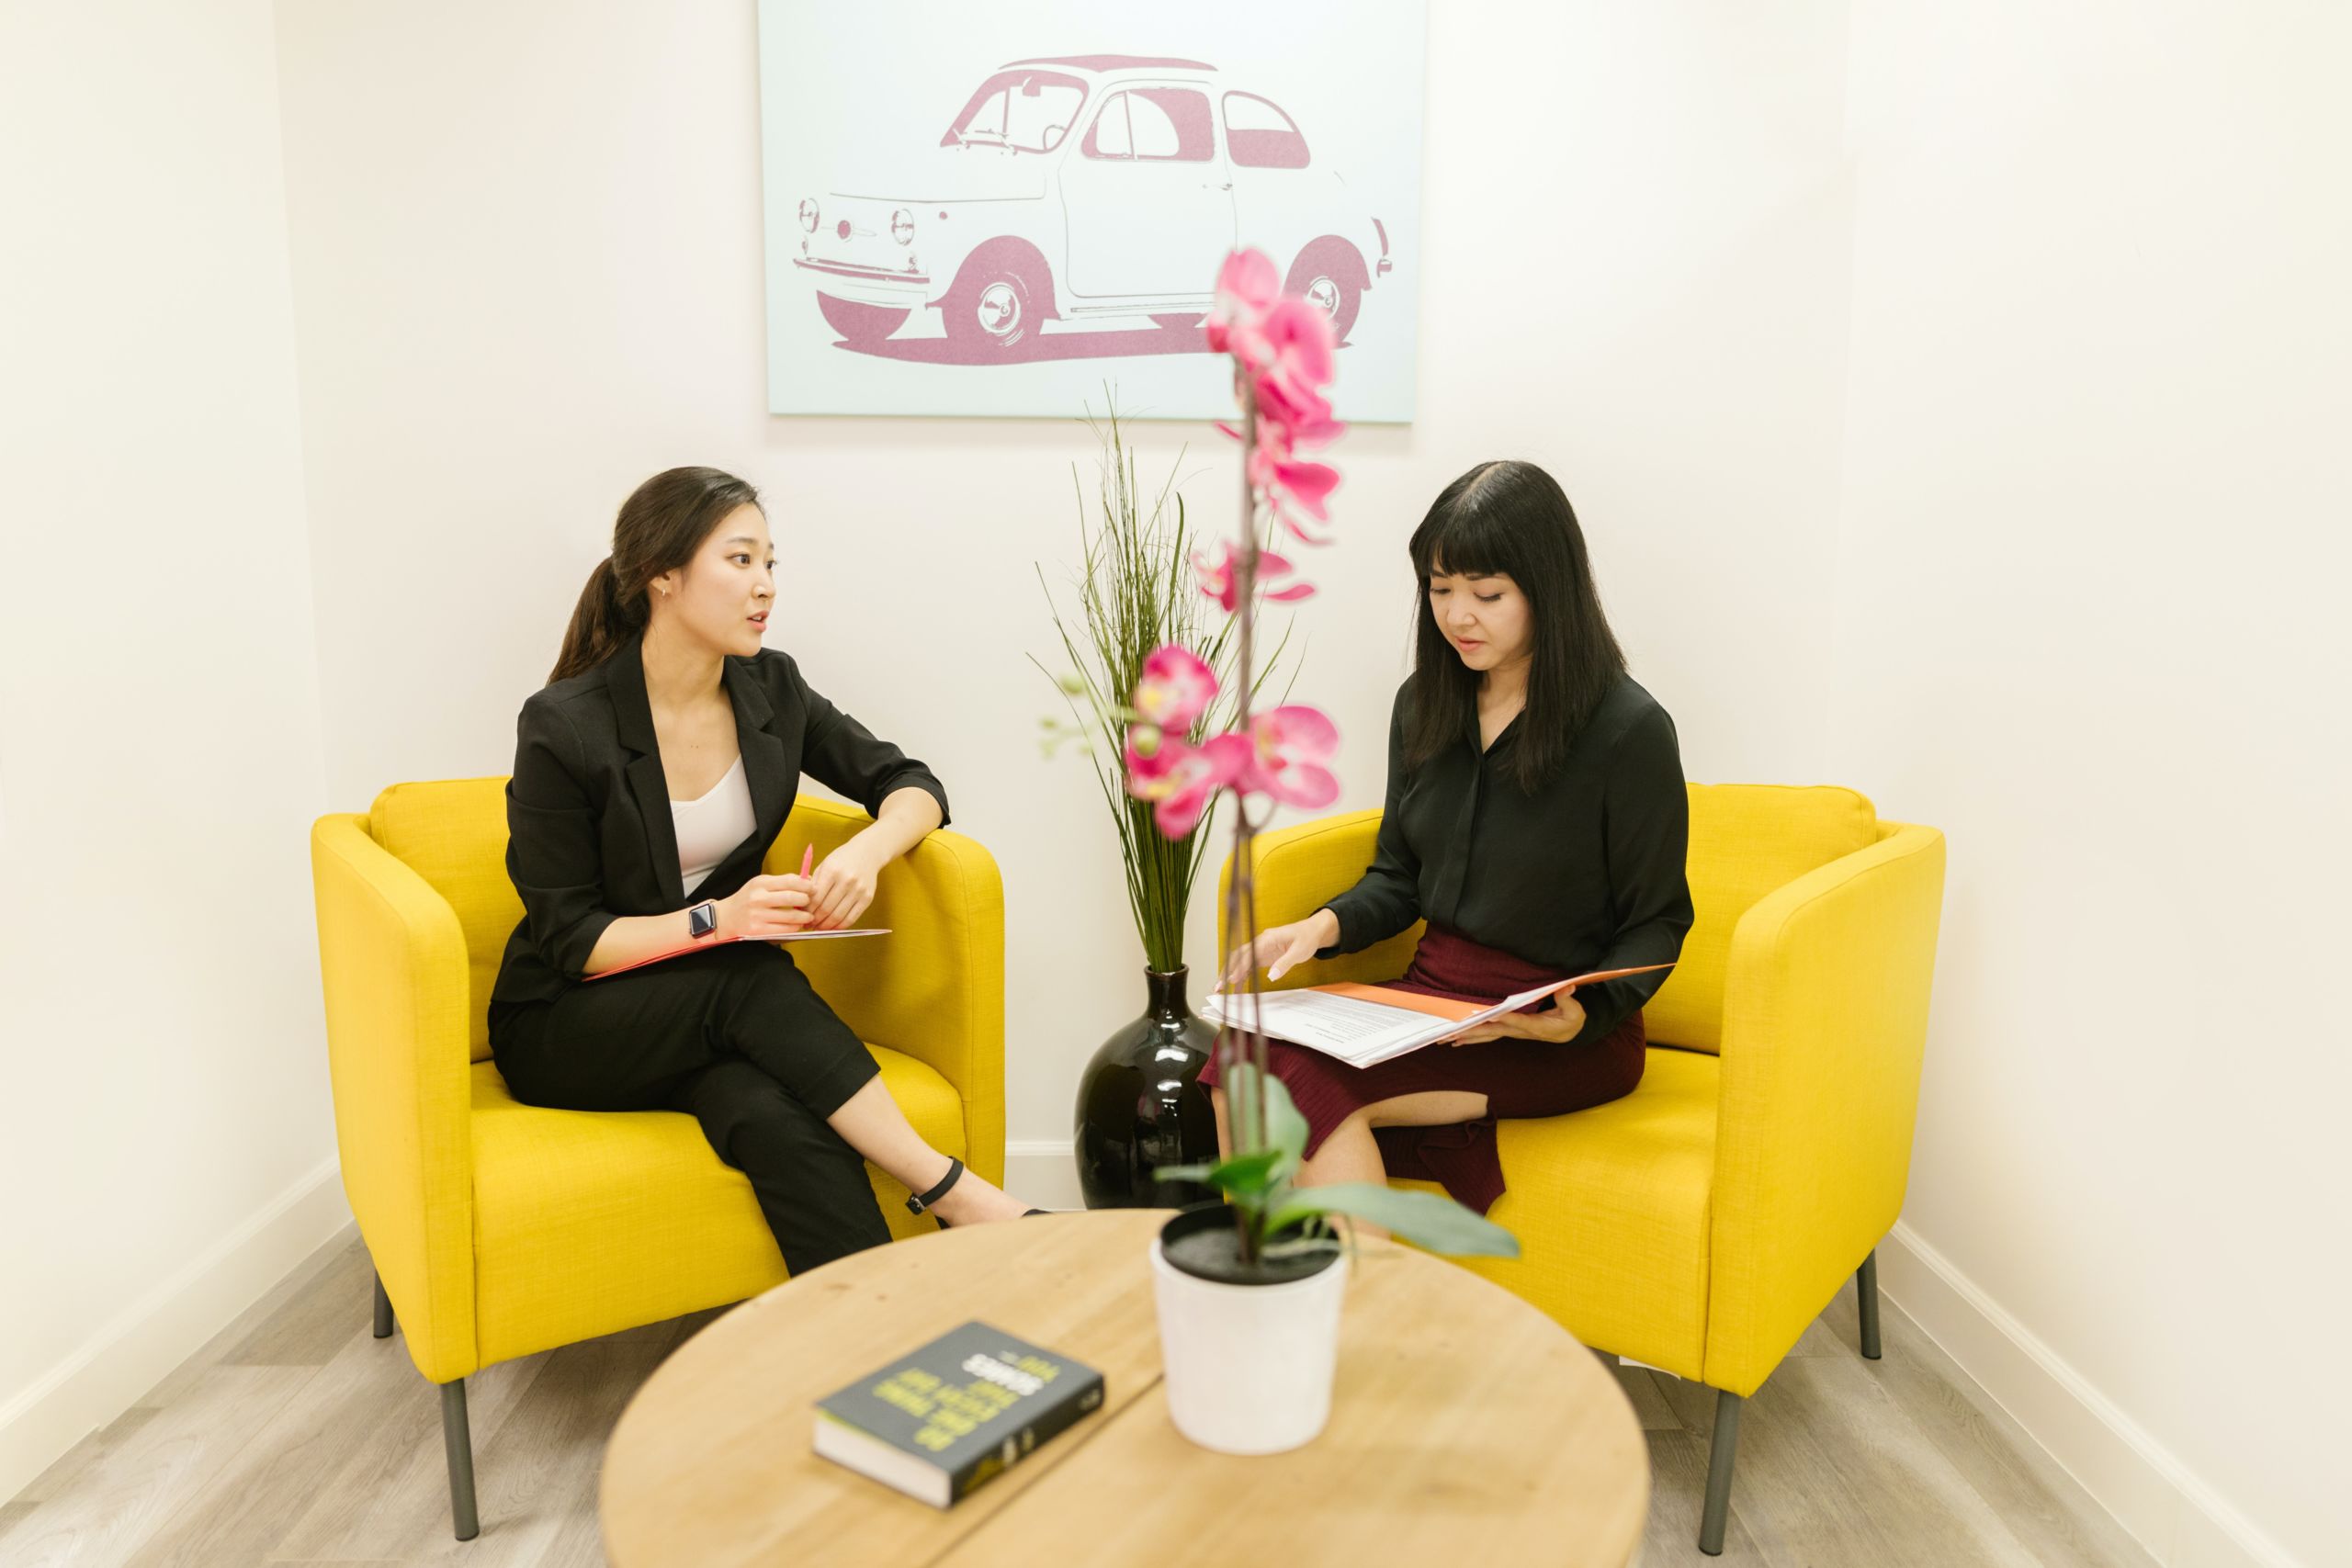 Two women sit on bright yellow chairs in an office room discussing recruiting strategies.